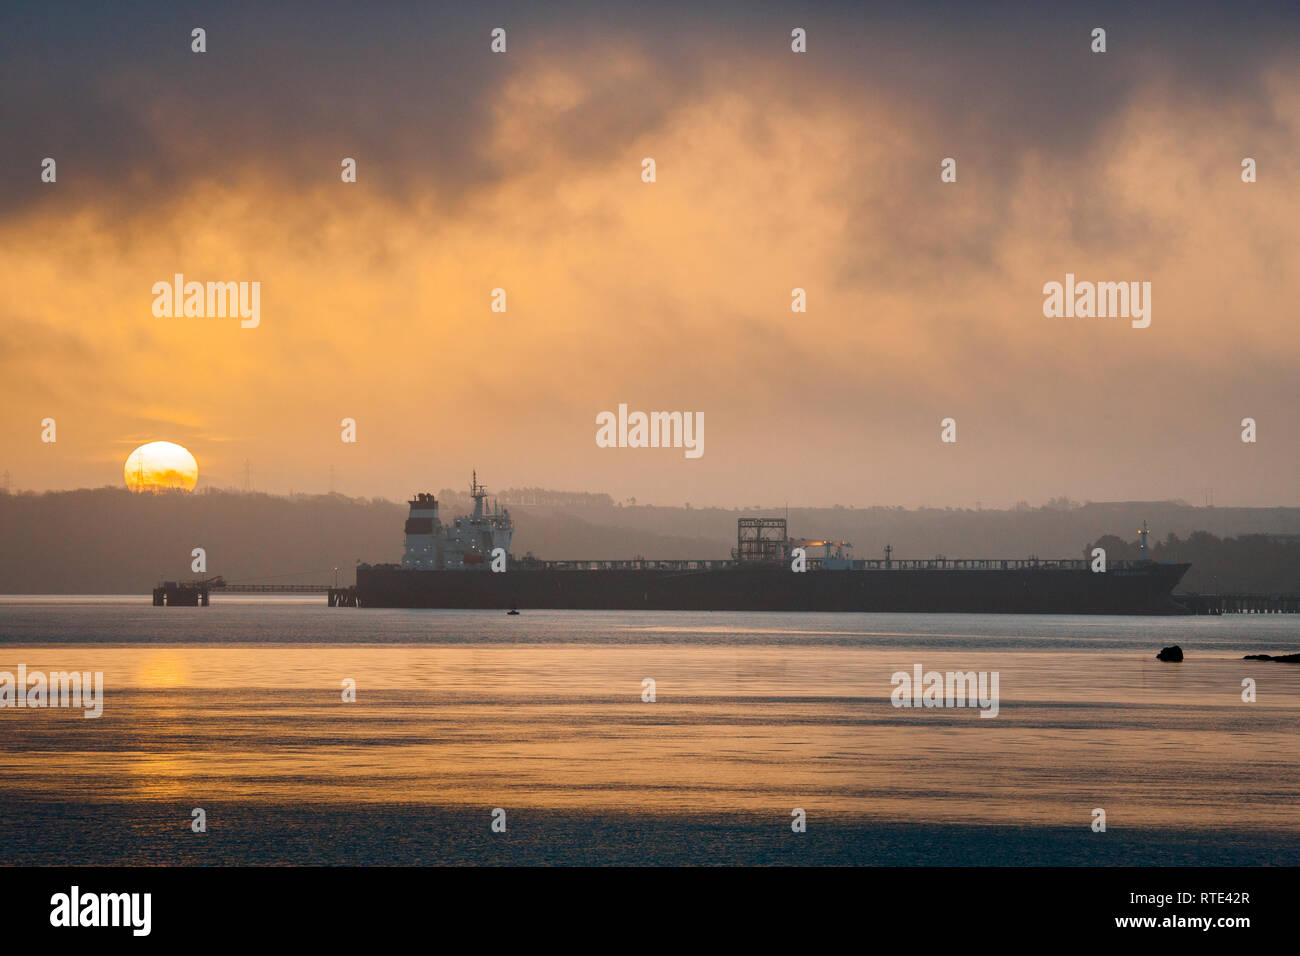 Whitegate, Cork, Ireland. Ist March, 2019. Sunrise lifts the mist and fog to reveal the superstructure of the 250 meter Crude oil tanker Searanger being unloaded at the Whitegate Oil Refinery in Co. Cork, Ireland. Credit: David Creedon/Alamy Live News Stock Photo